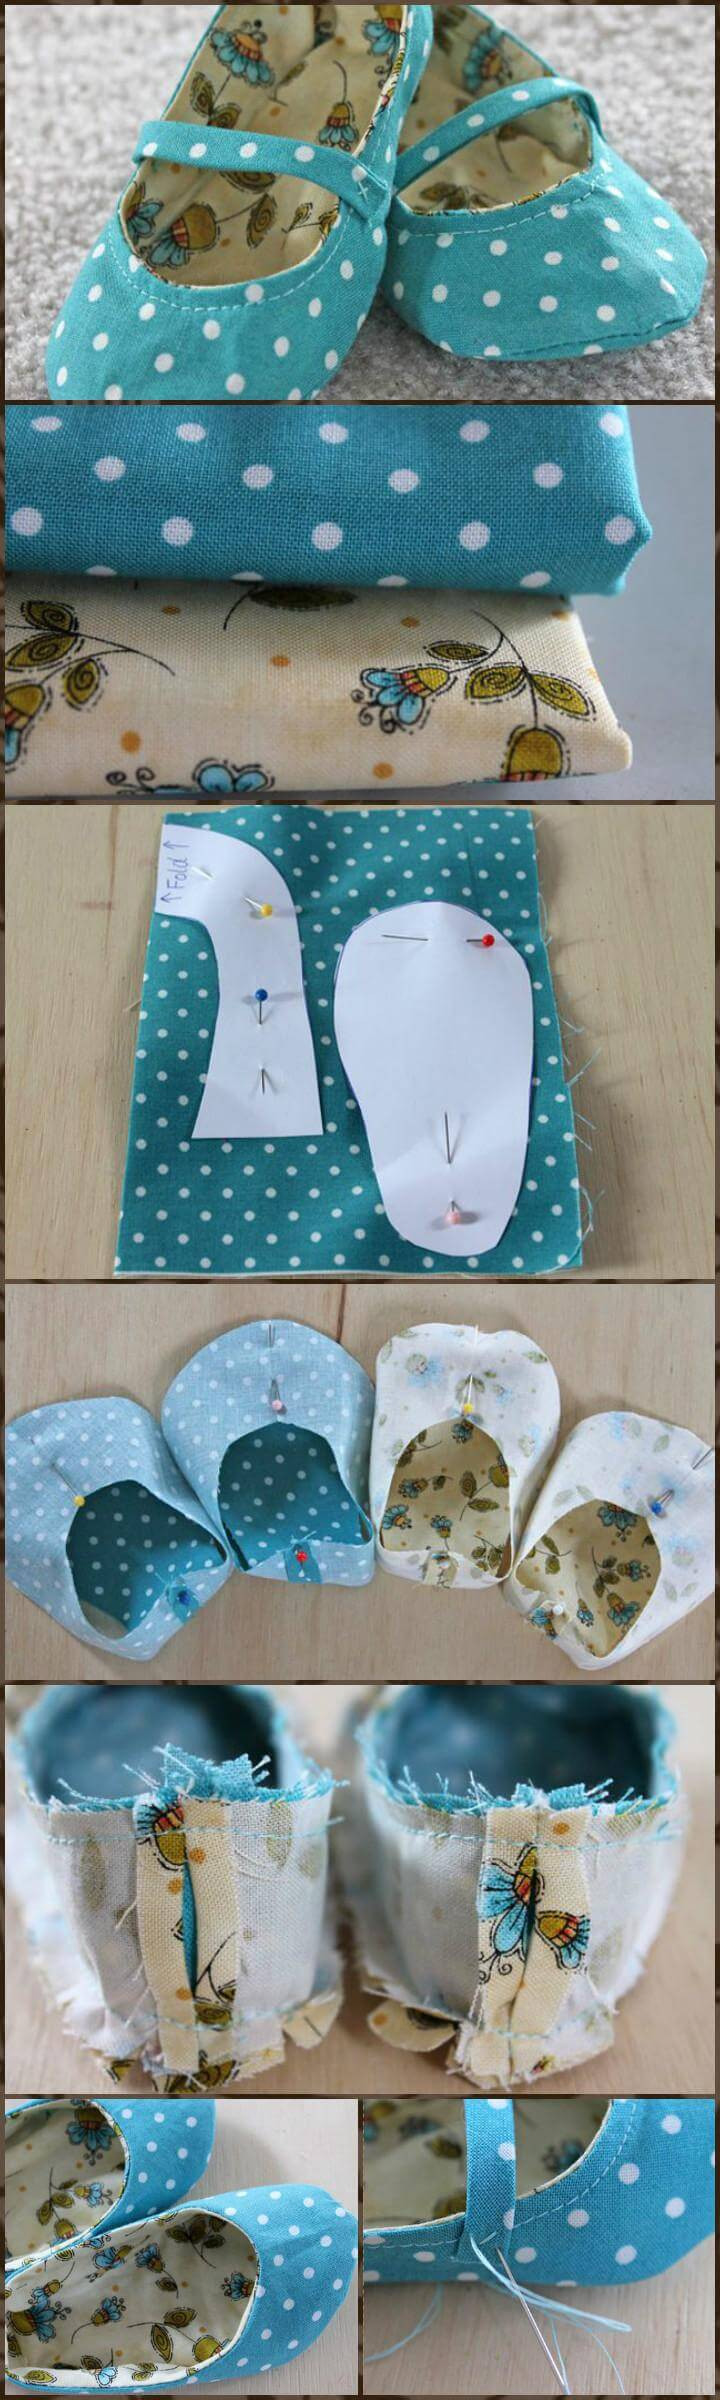 DIY Baby Shoes Pattern
 55 DIY Baby Shoes with Free Patterns and Tutorials ⋆ DIY